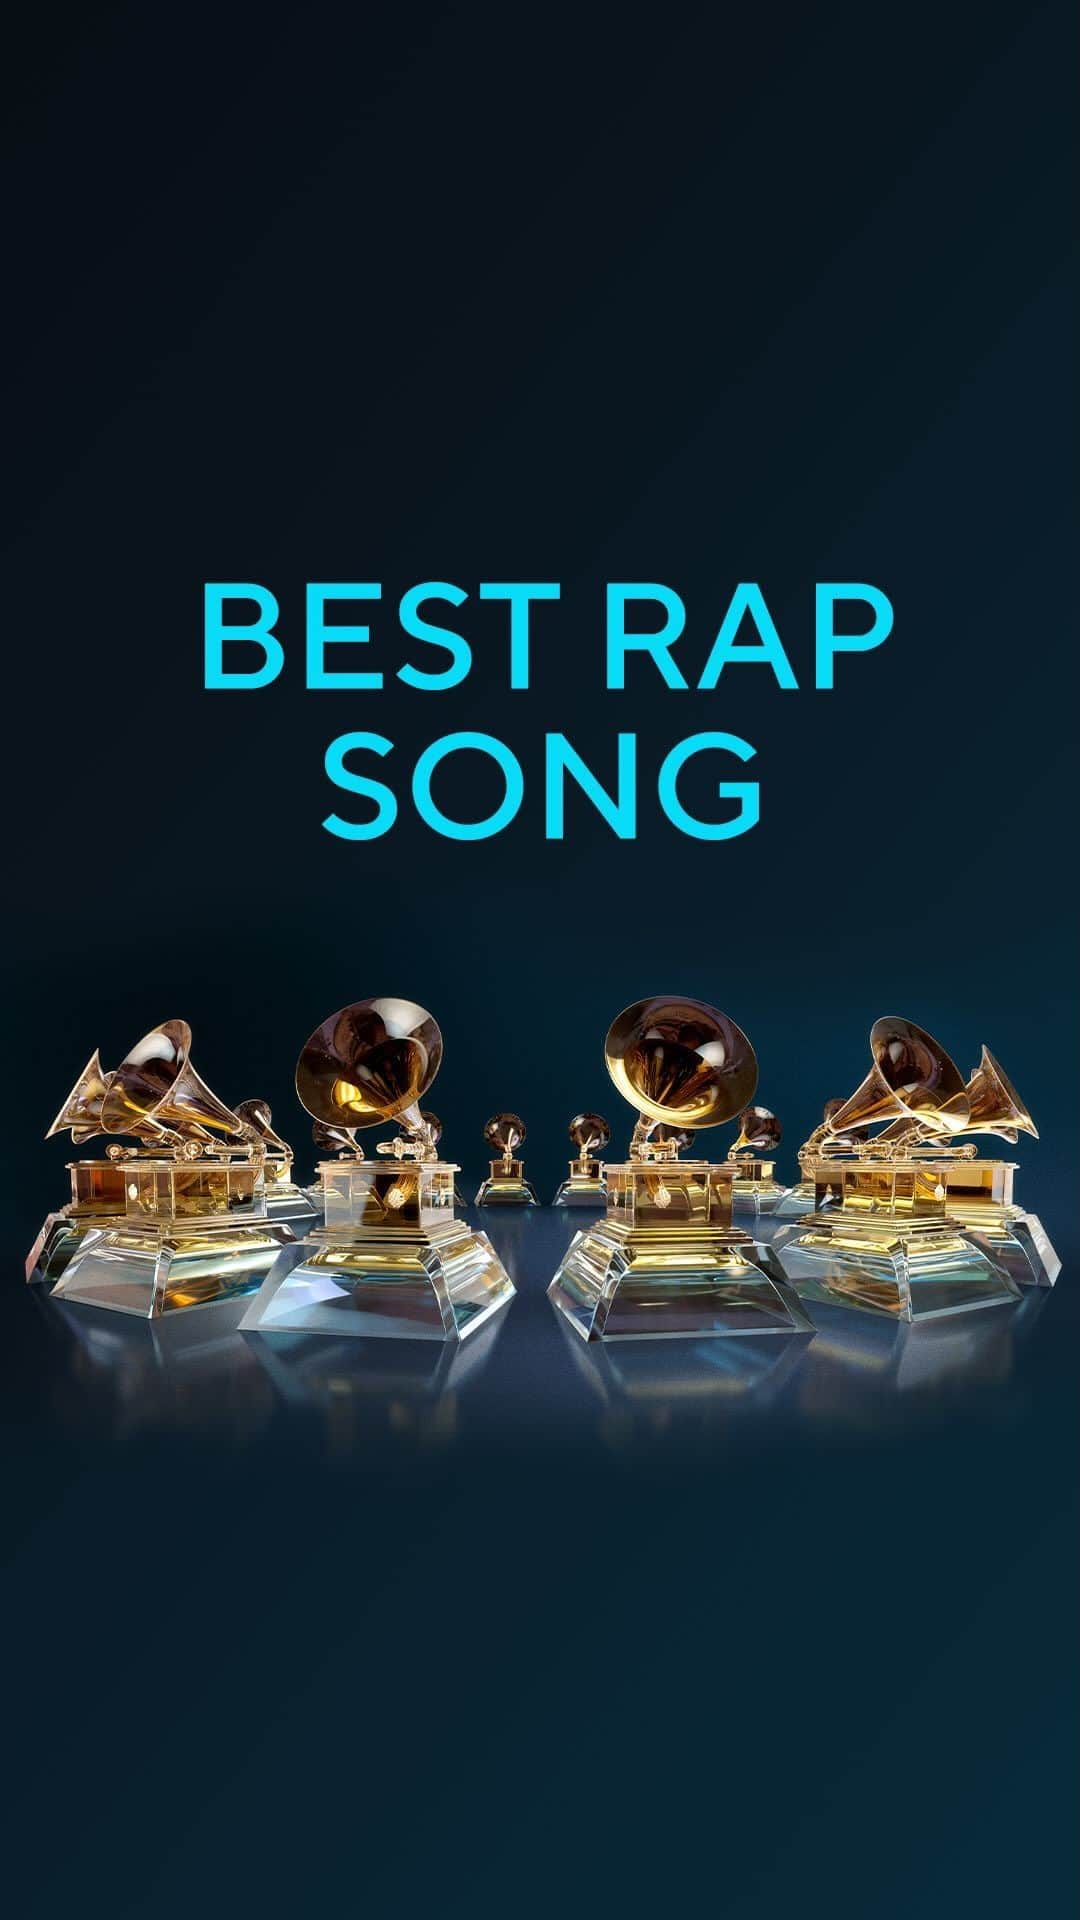 The GRAMMYsのインスタグラム：「Congratulations 66th #GRAMMYs Best Rap Song nominees!  🎵 @dojacat - “Attention”  🎵 @nickiminaj & @icespice Featuring @aqua.dk - “Barbie World” [From Barbie The Album]  🎵 @liluzivert - “Just Wanna Rock”  🎵 @champagnepapi & @21savage - “Rich Flex”  🎵 @killermike Featuring @andre3000, @future And @erynallenkane - “SCIENTISTS & ENGINEERS”  🎤 View the full GRAMMY nominations list on GRAMMY.com or click the link in our bio, and watch the GRAMMY Awards on Feb. 4, 2024 on @CBStv.」